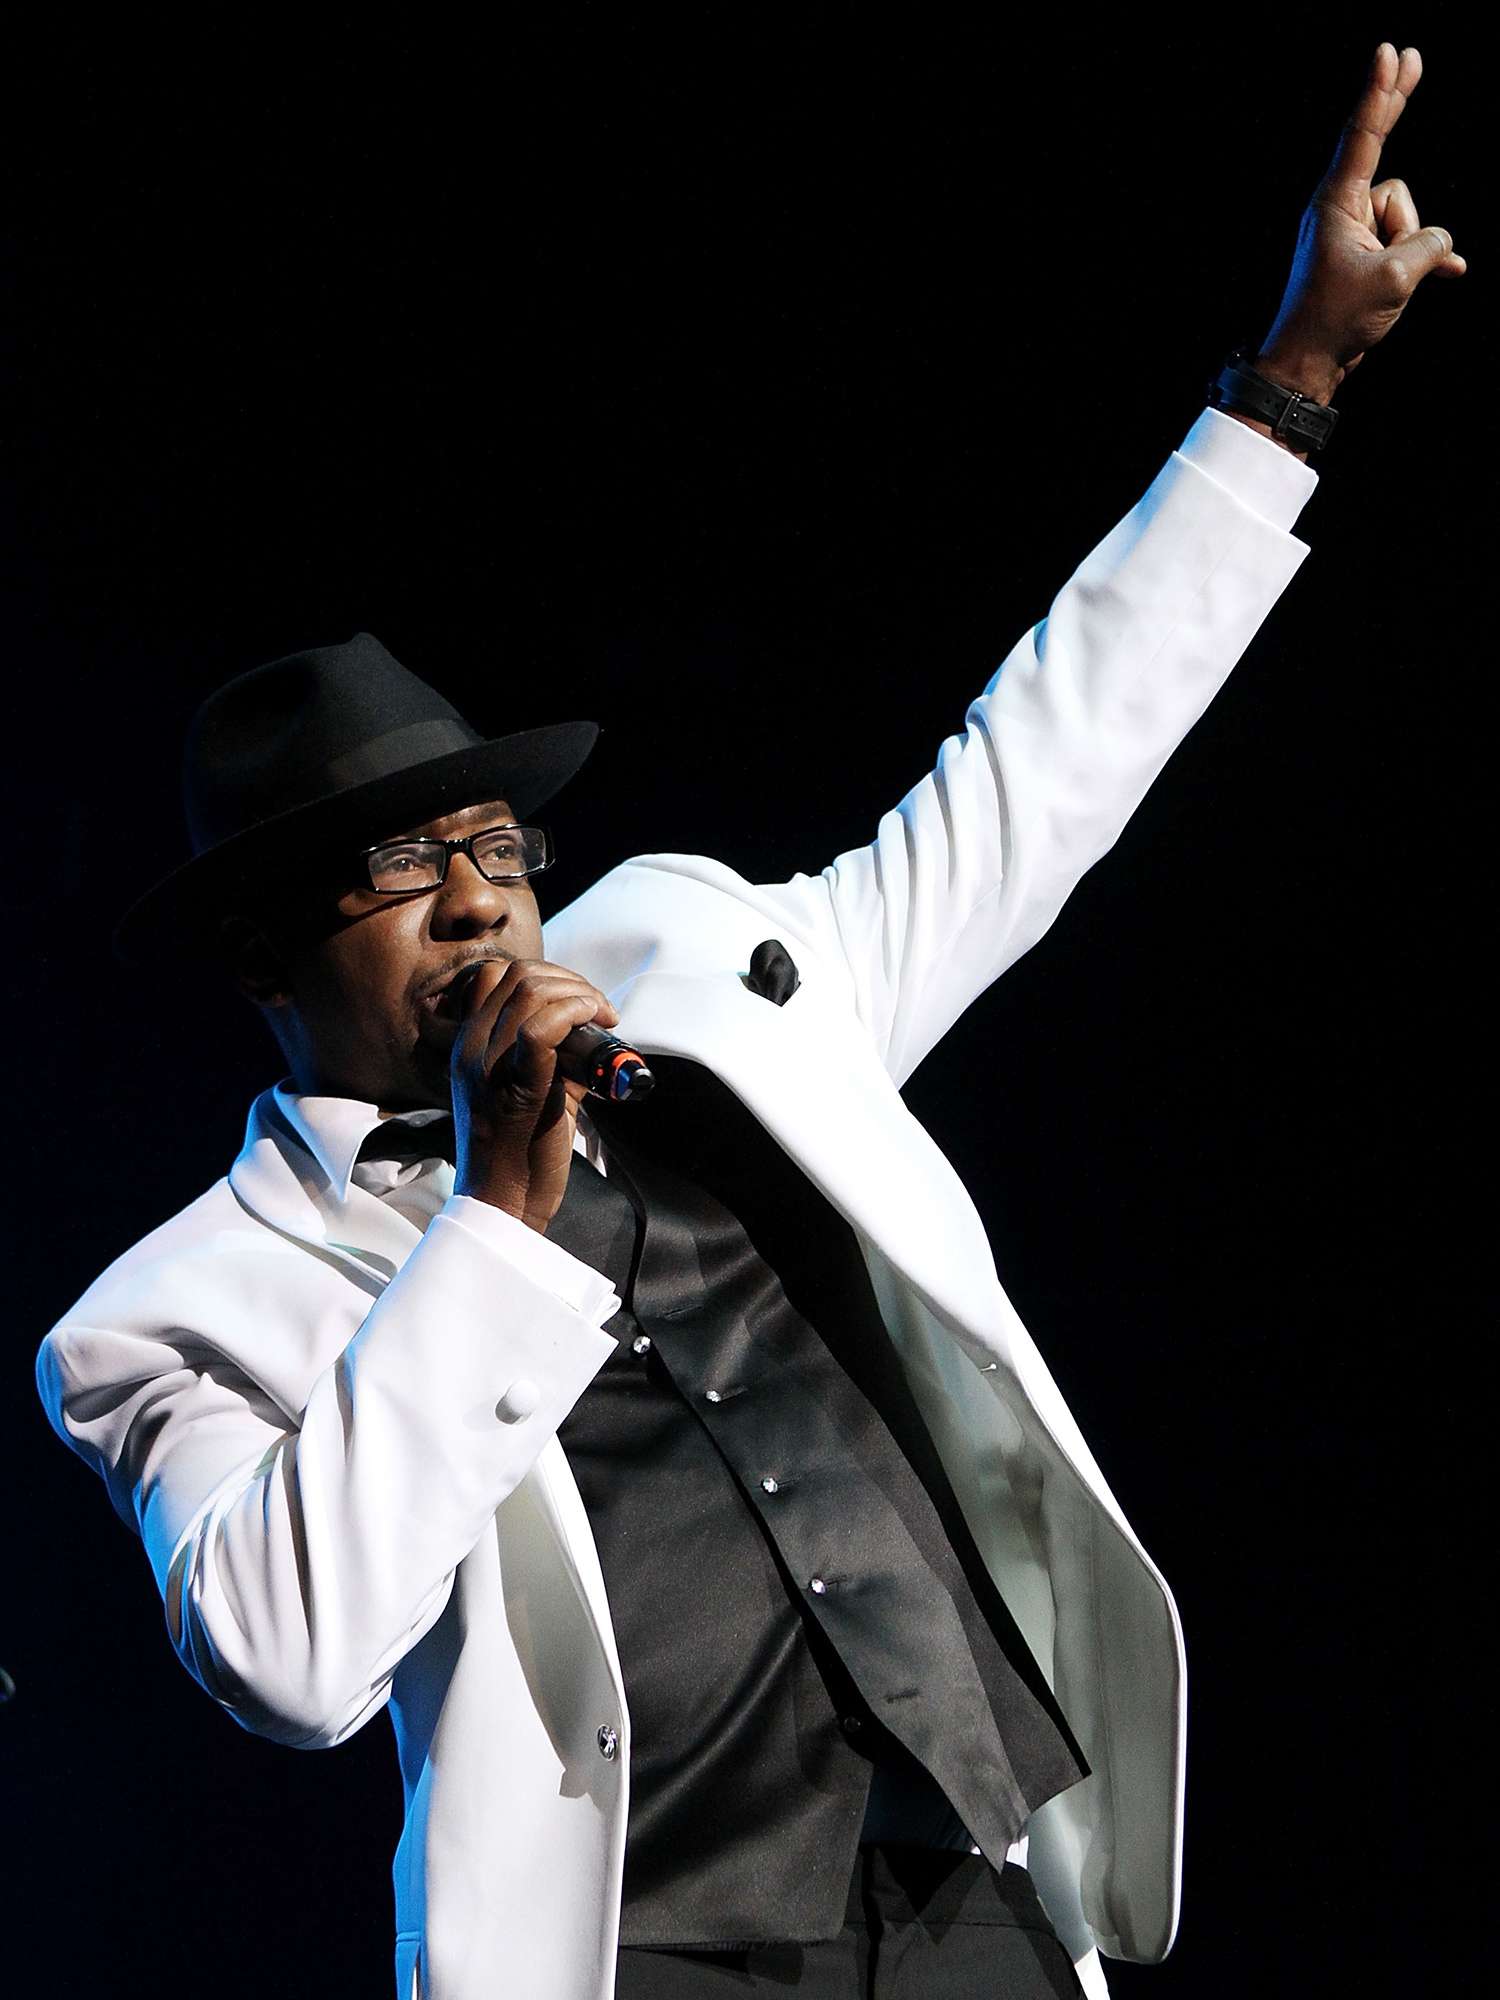 Bobby Brown performs with New Edition at Mohegan Sun Arena on February 18, 2012 in Uncasville, Connecticut